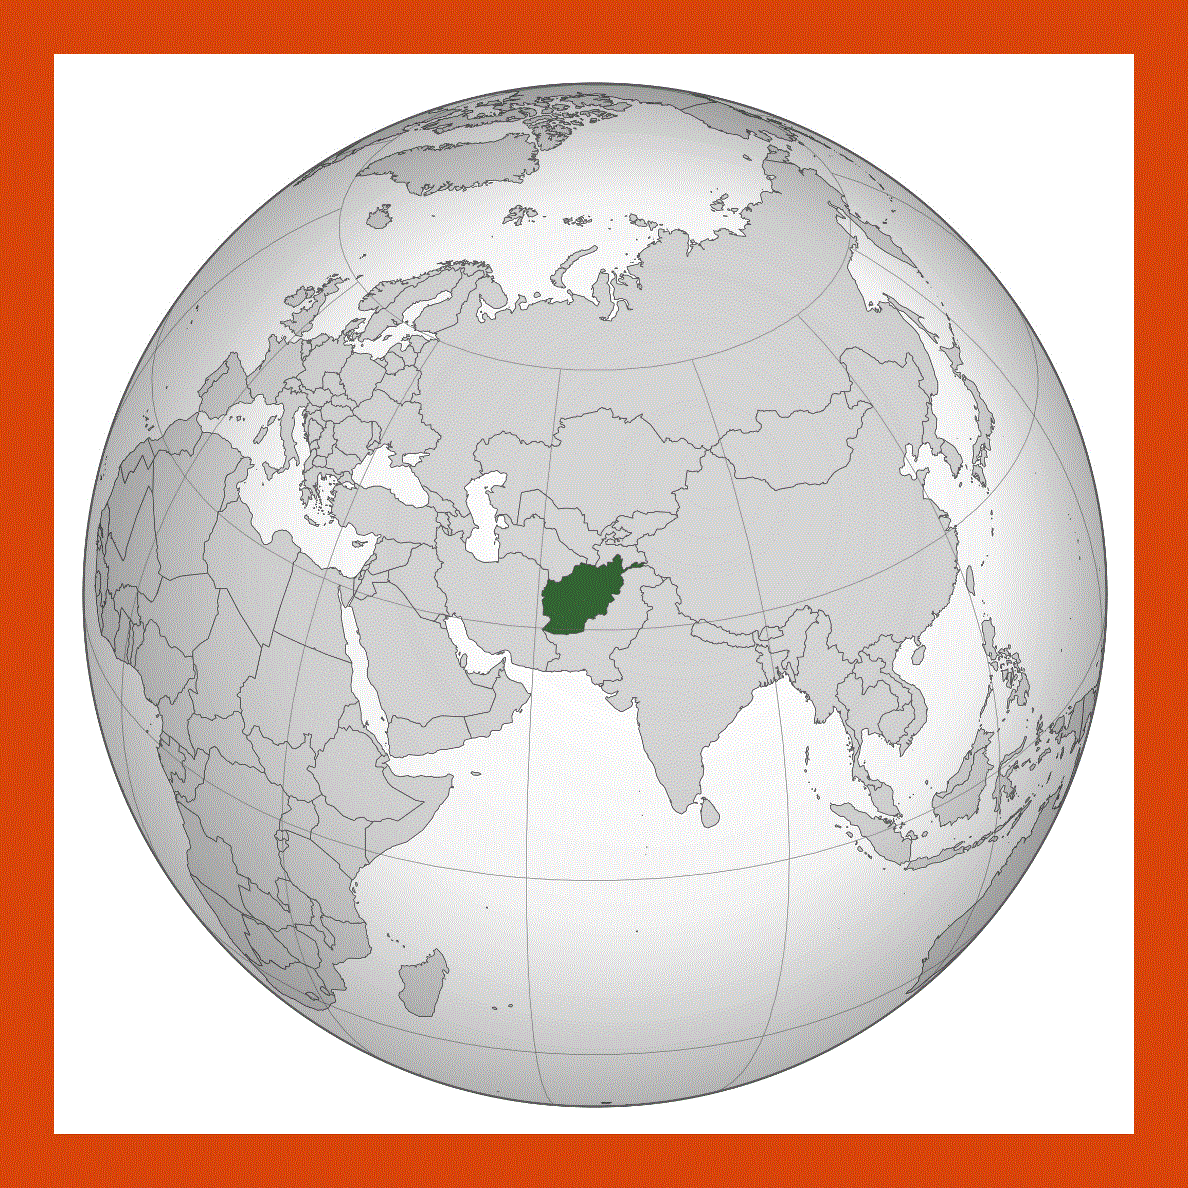 Location map of Afghanistan in Asia